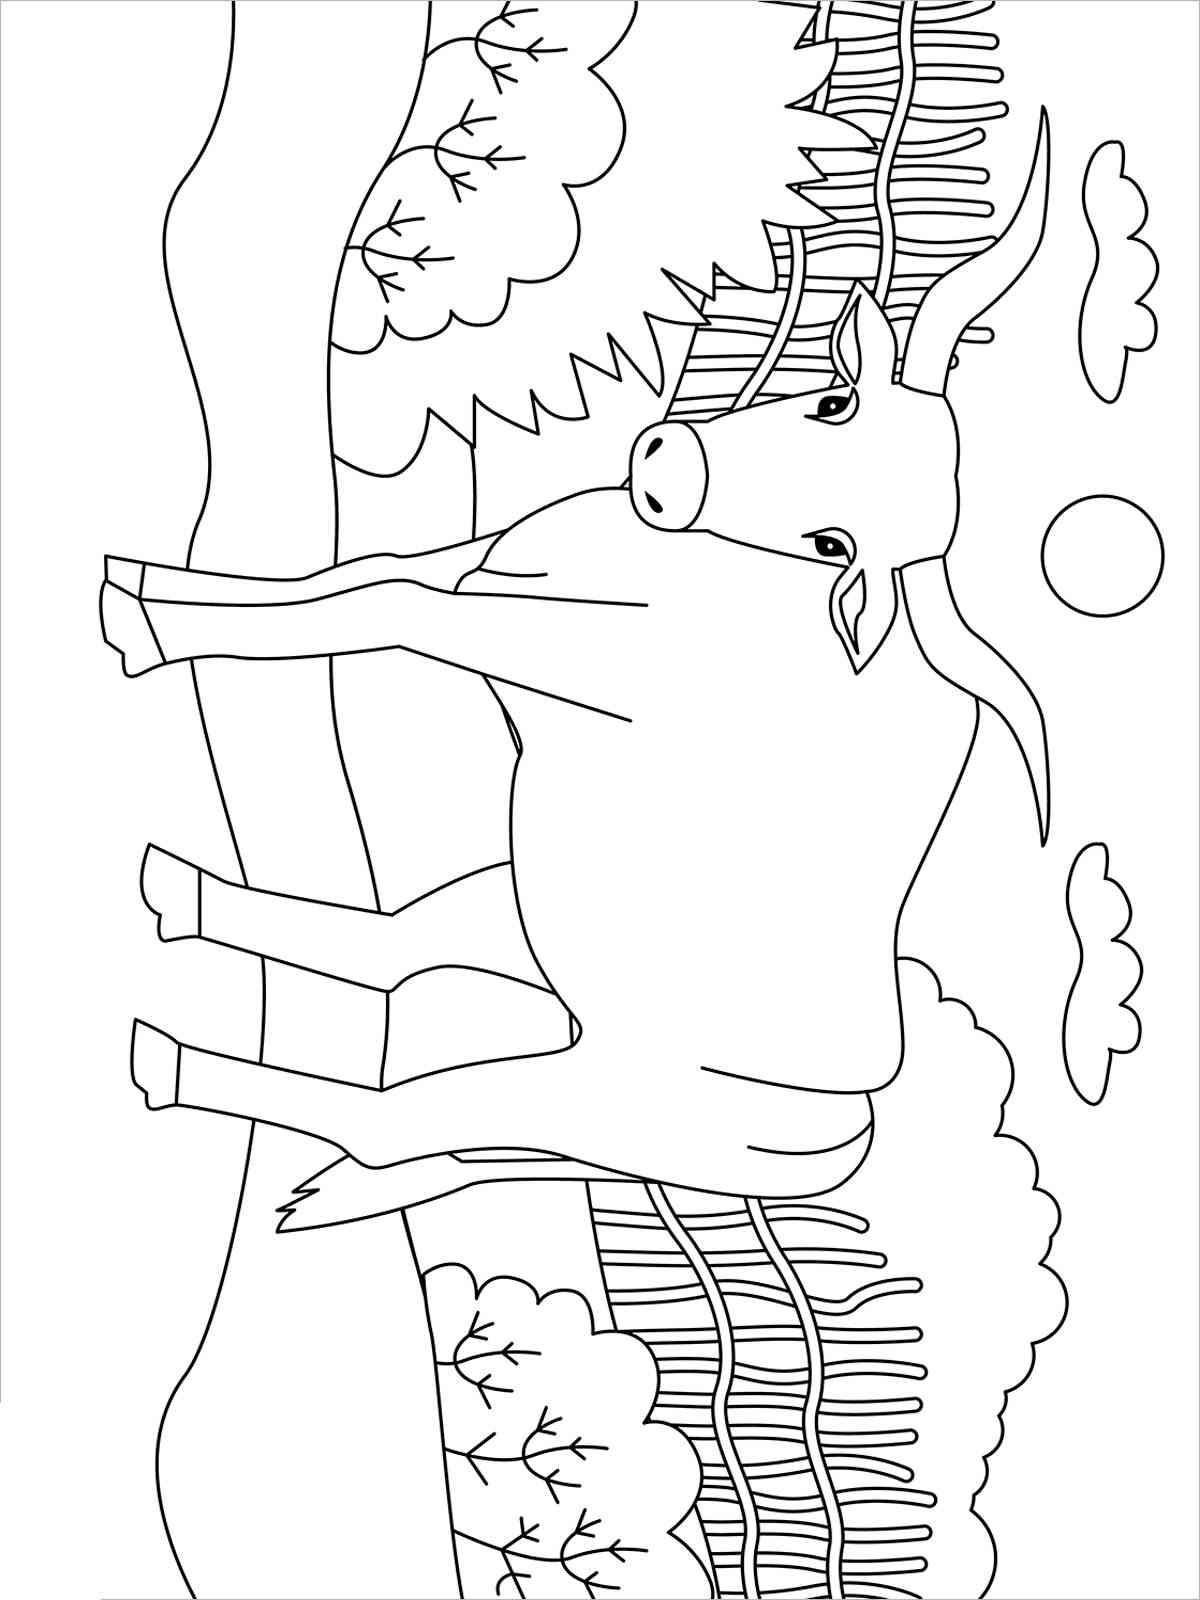 Ox on the Farm coloring page